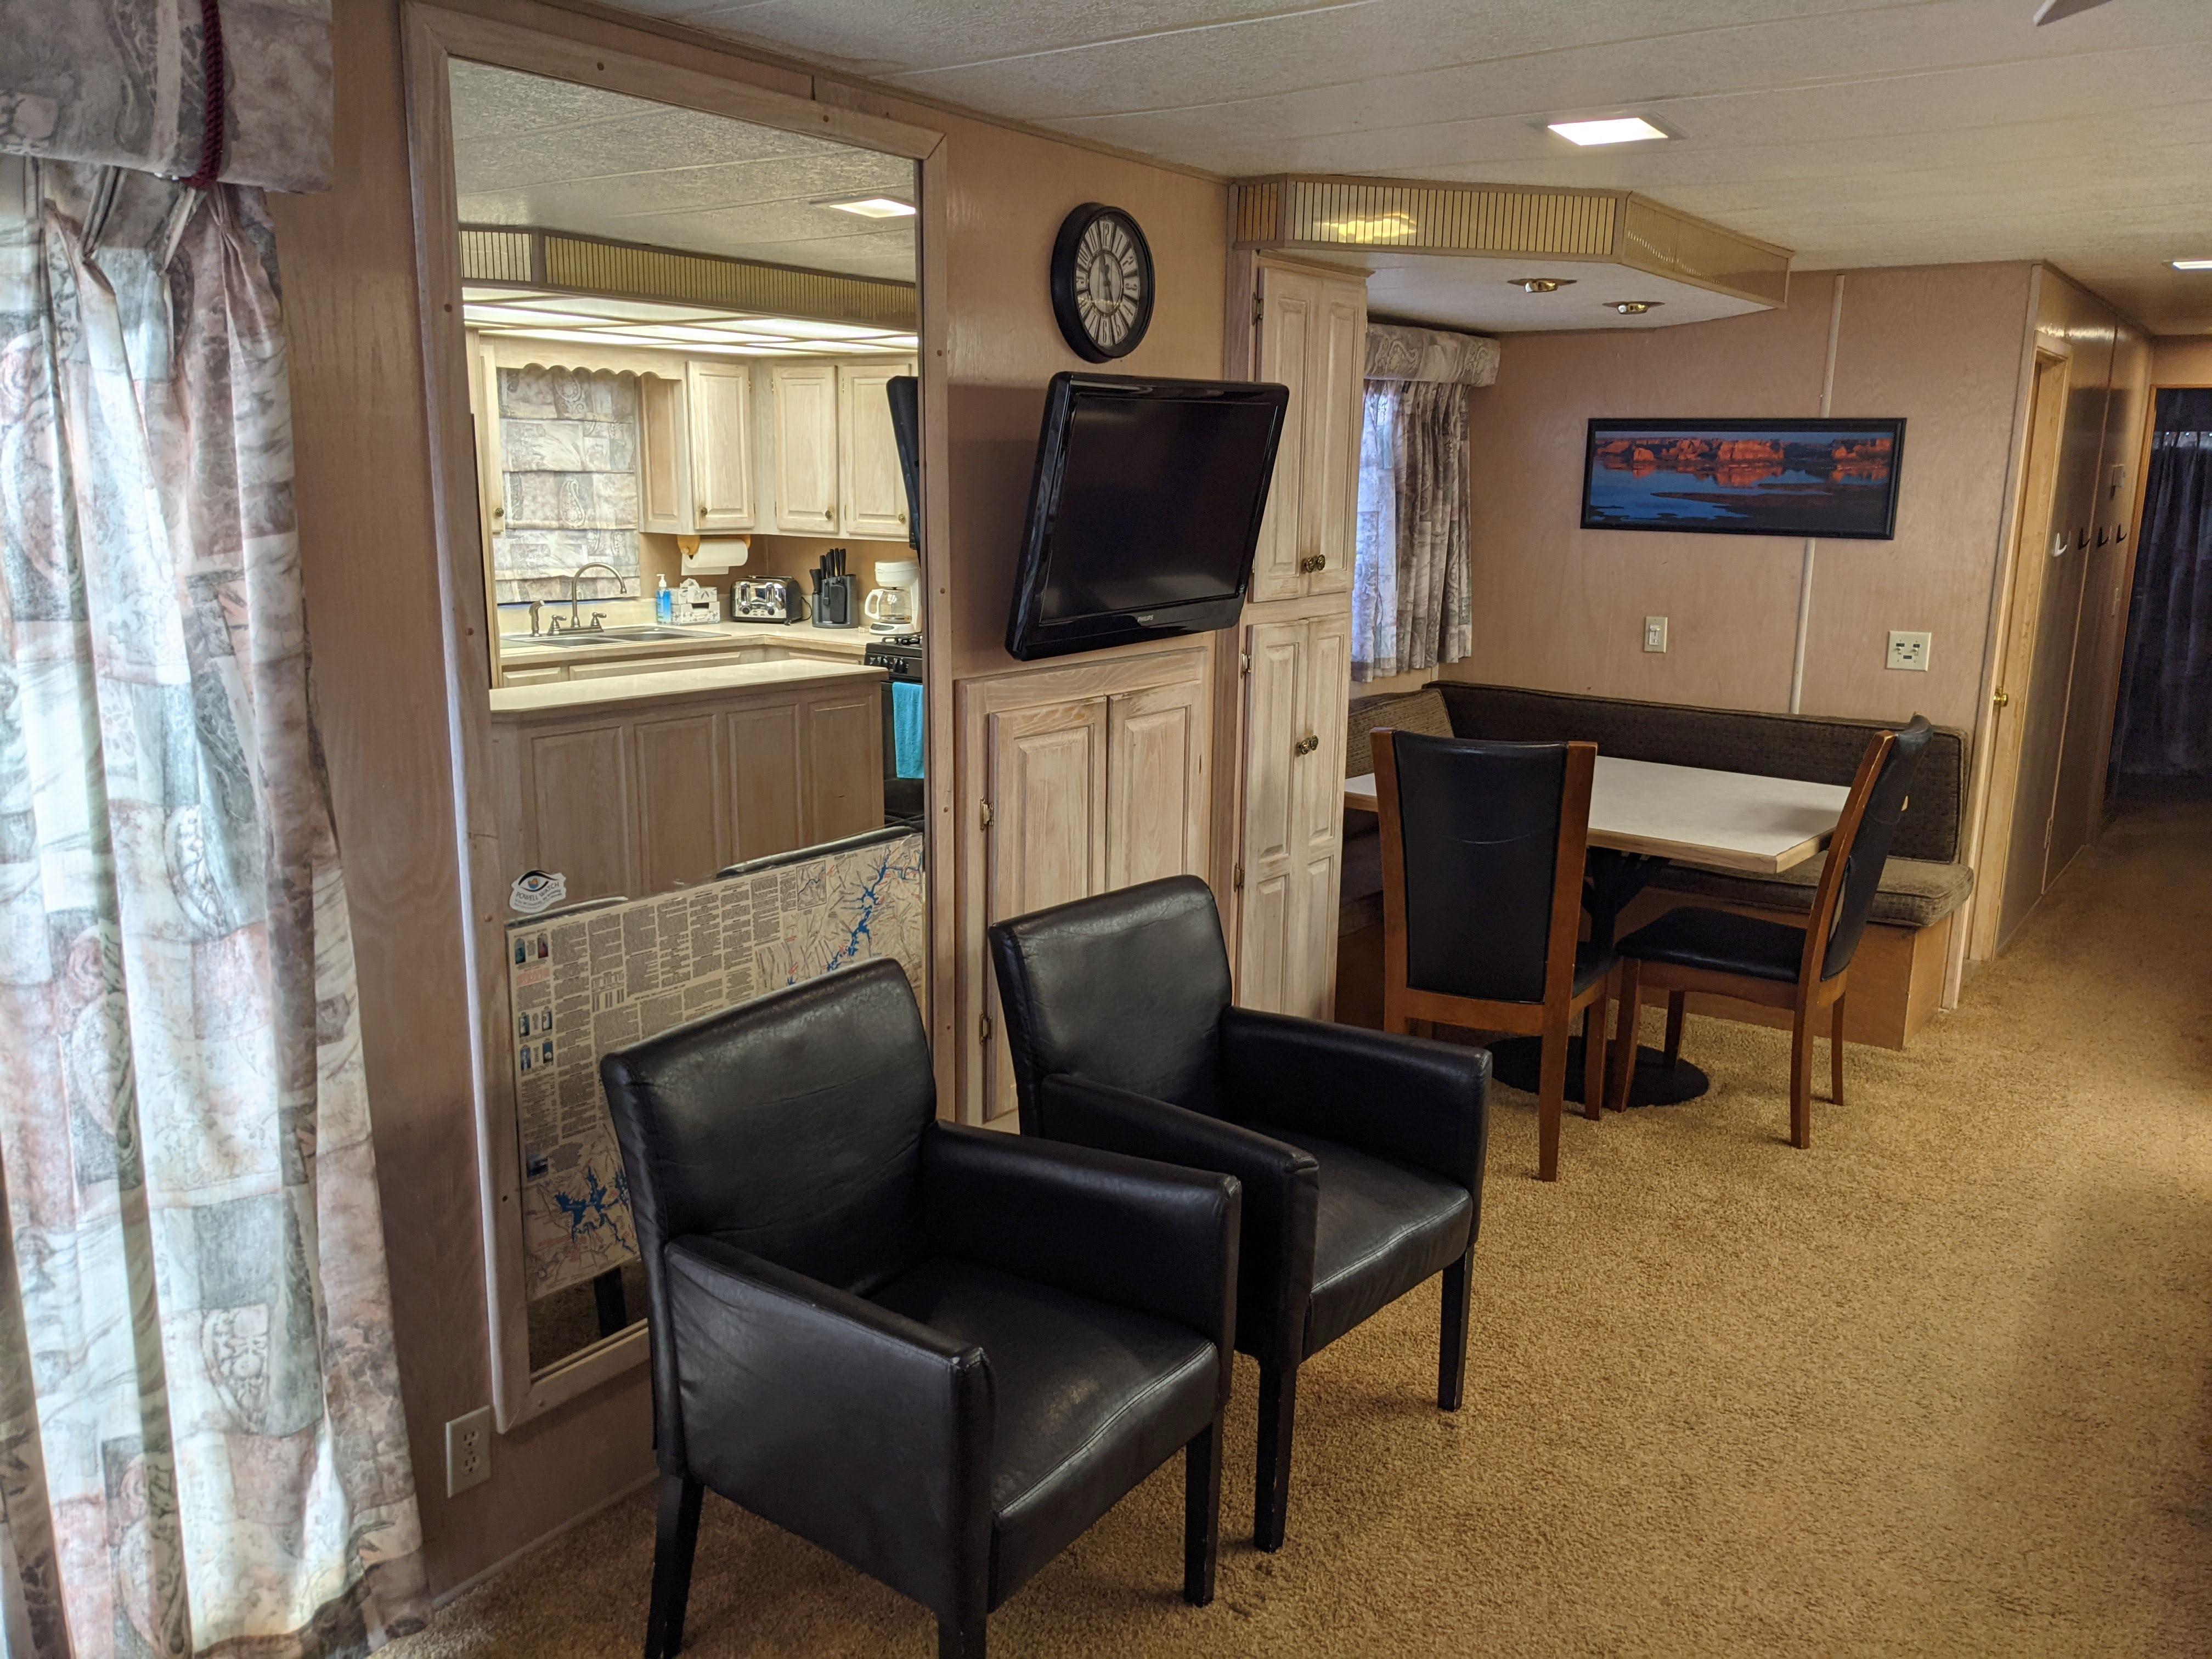 1993 Lakeview Multi Owner Houseboat